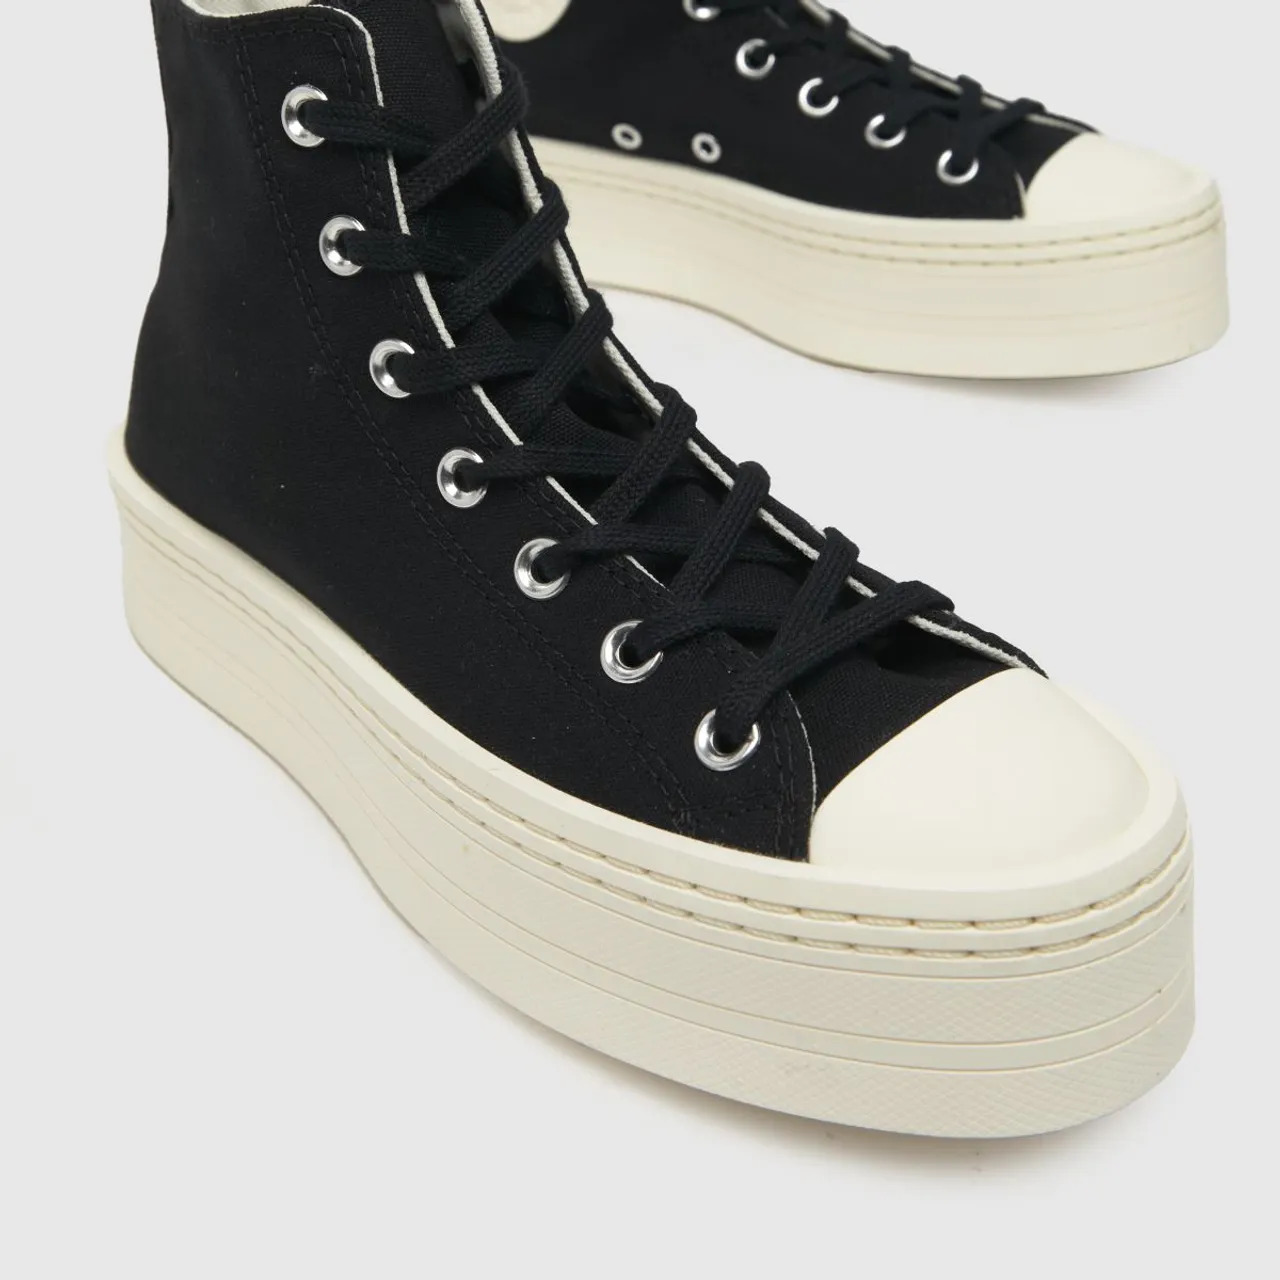 Converse All Star Modern Lift Trainers In Black & White